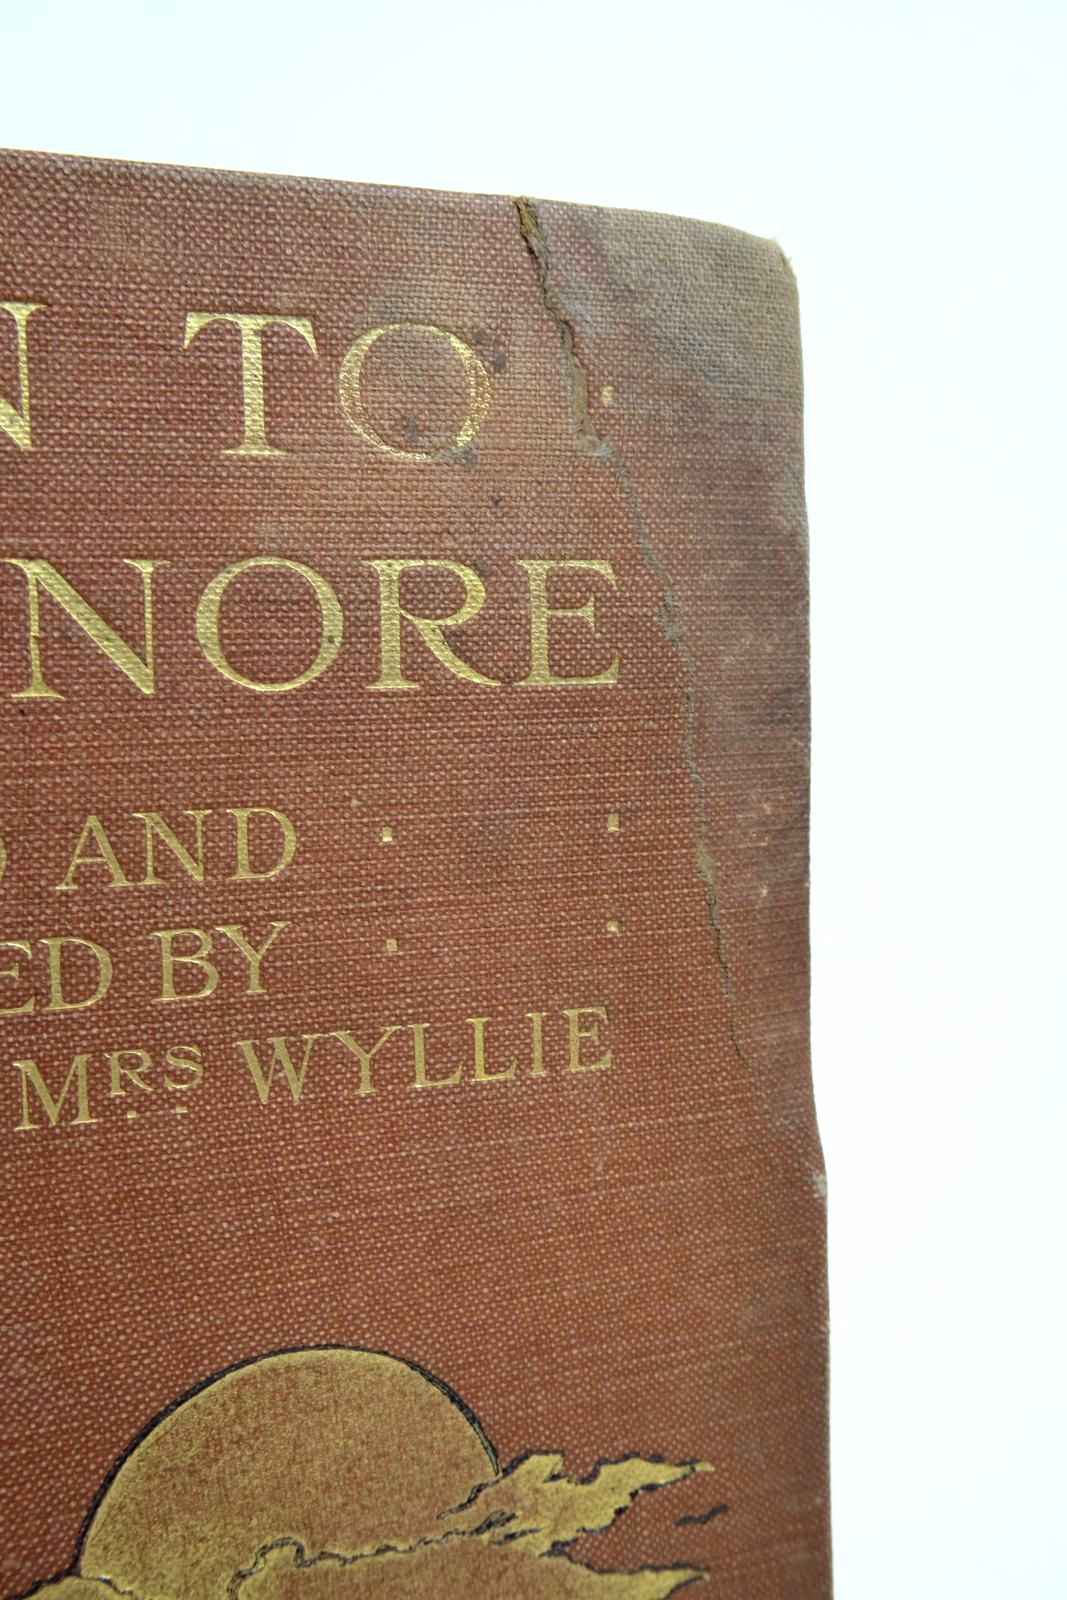 Photo of LONDON TO THE NORE written by Wyllie, W.L.
Wyllie, M.A. illustrated by Wyllie, W.L.
Wyllie, M.A. published by A. & C. Black (STOCK CODE: 2137438)  for sale by Stella & Rose's Books